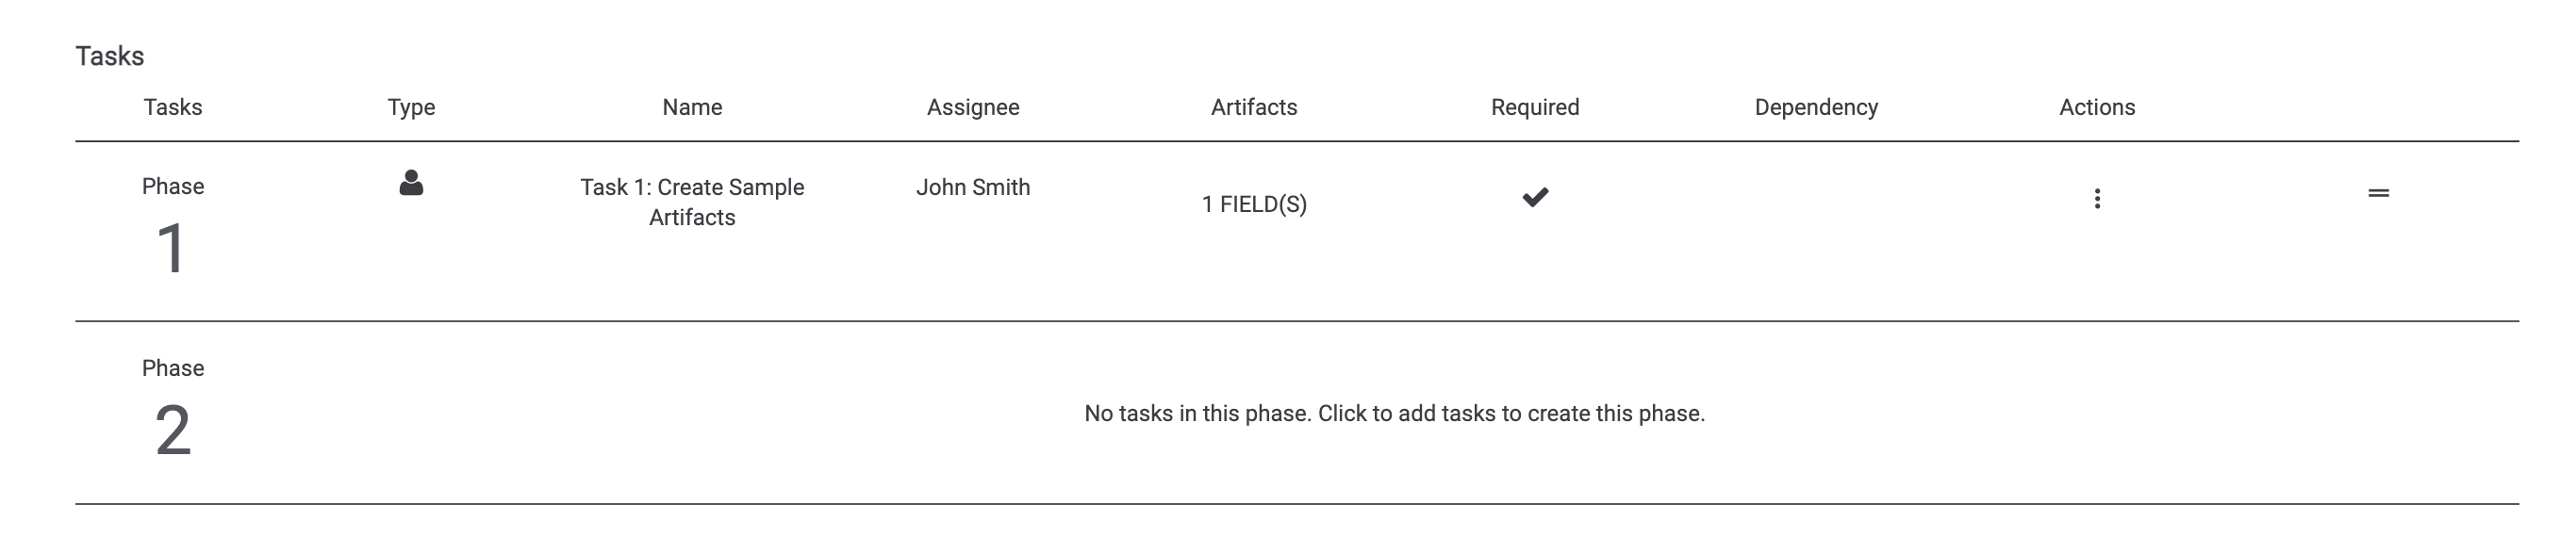 Figure 7_Building and Activating a Workflow_7.1.0